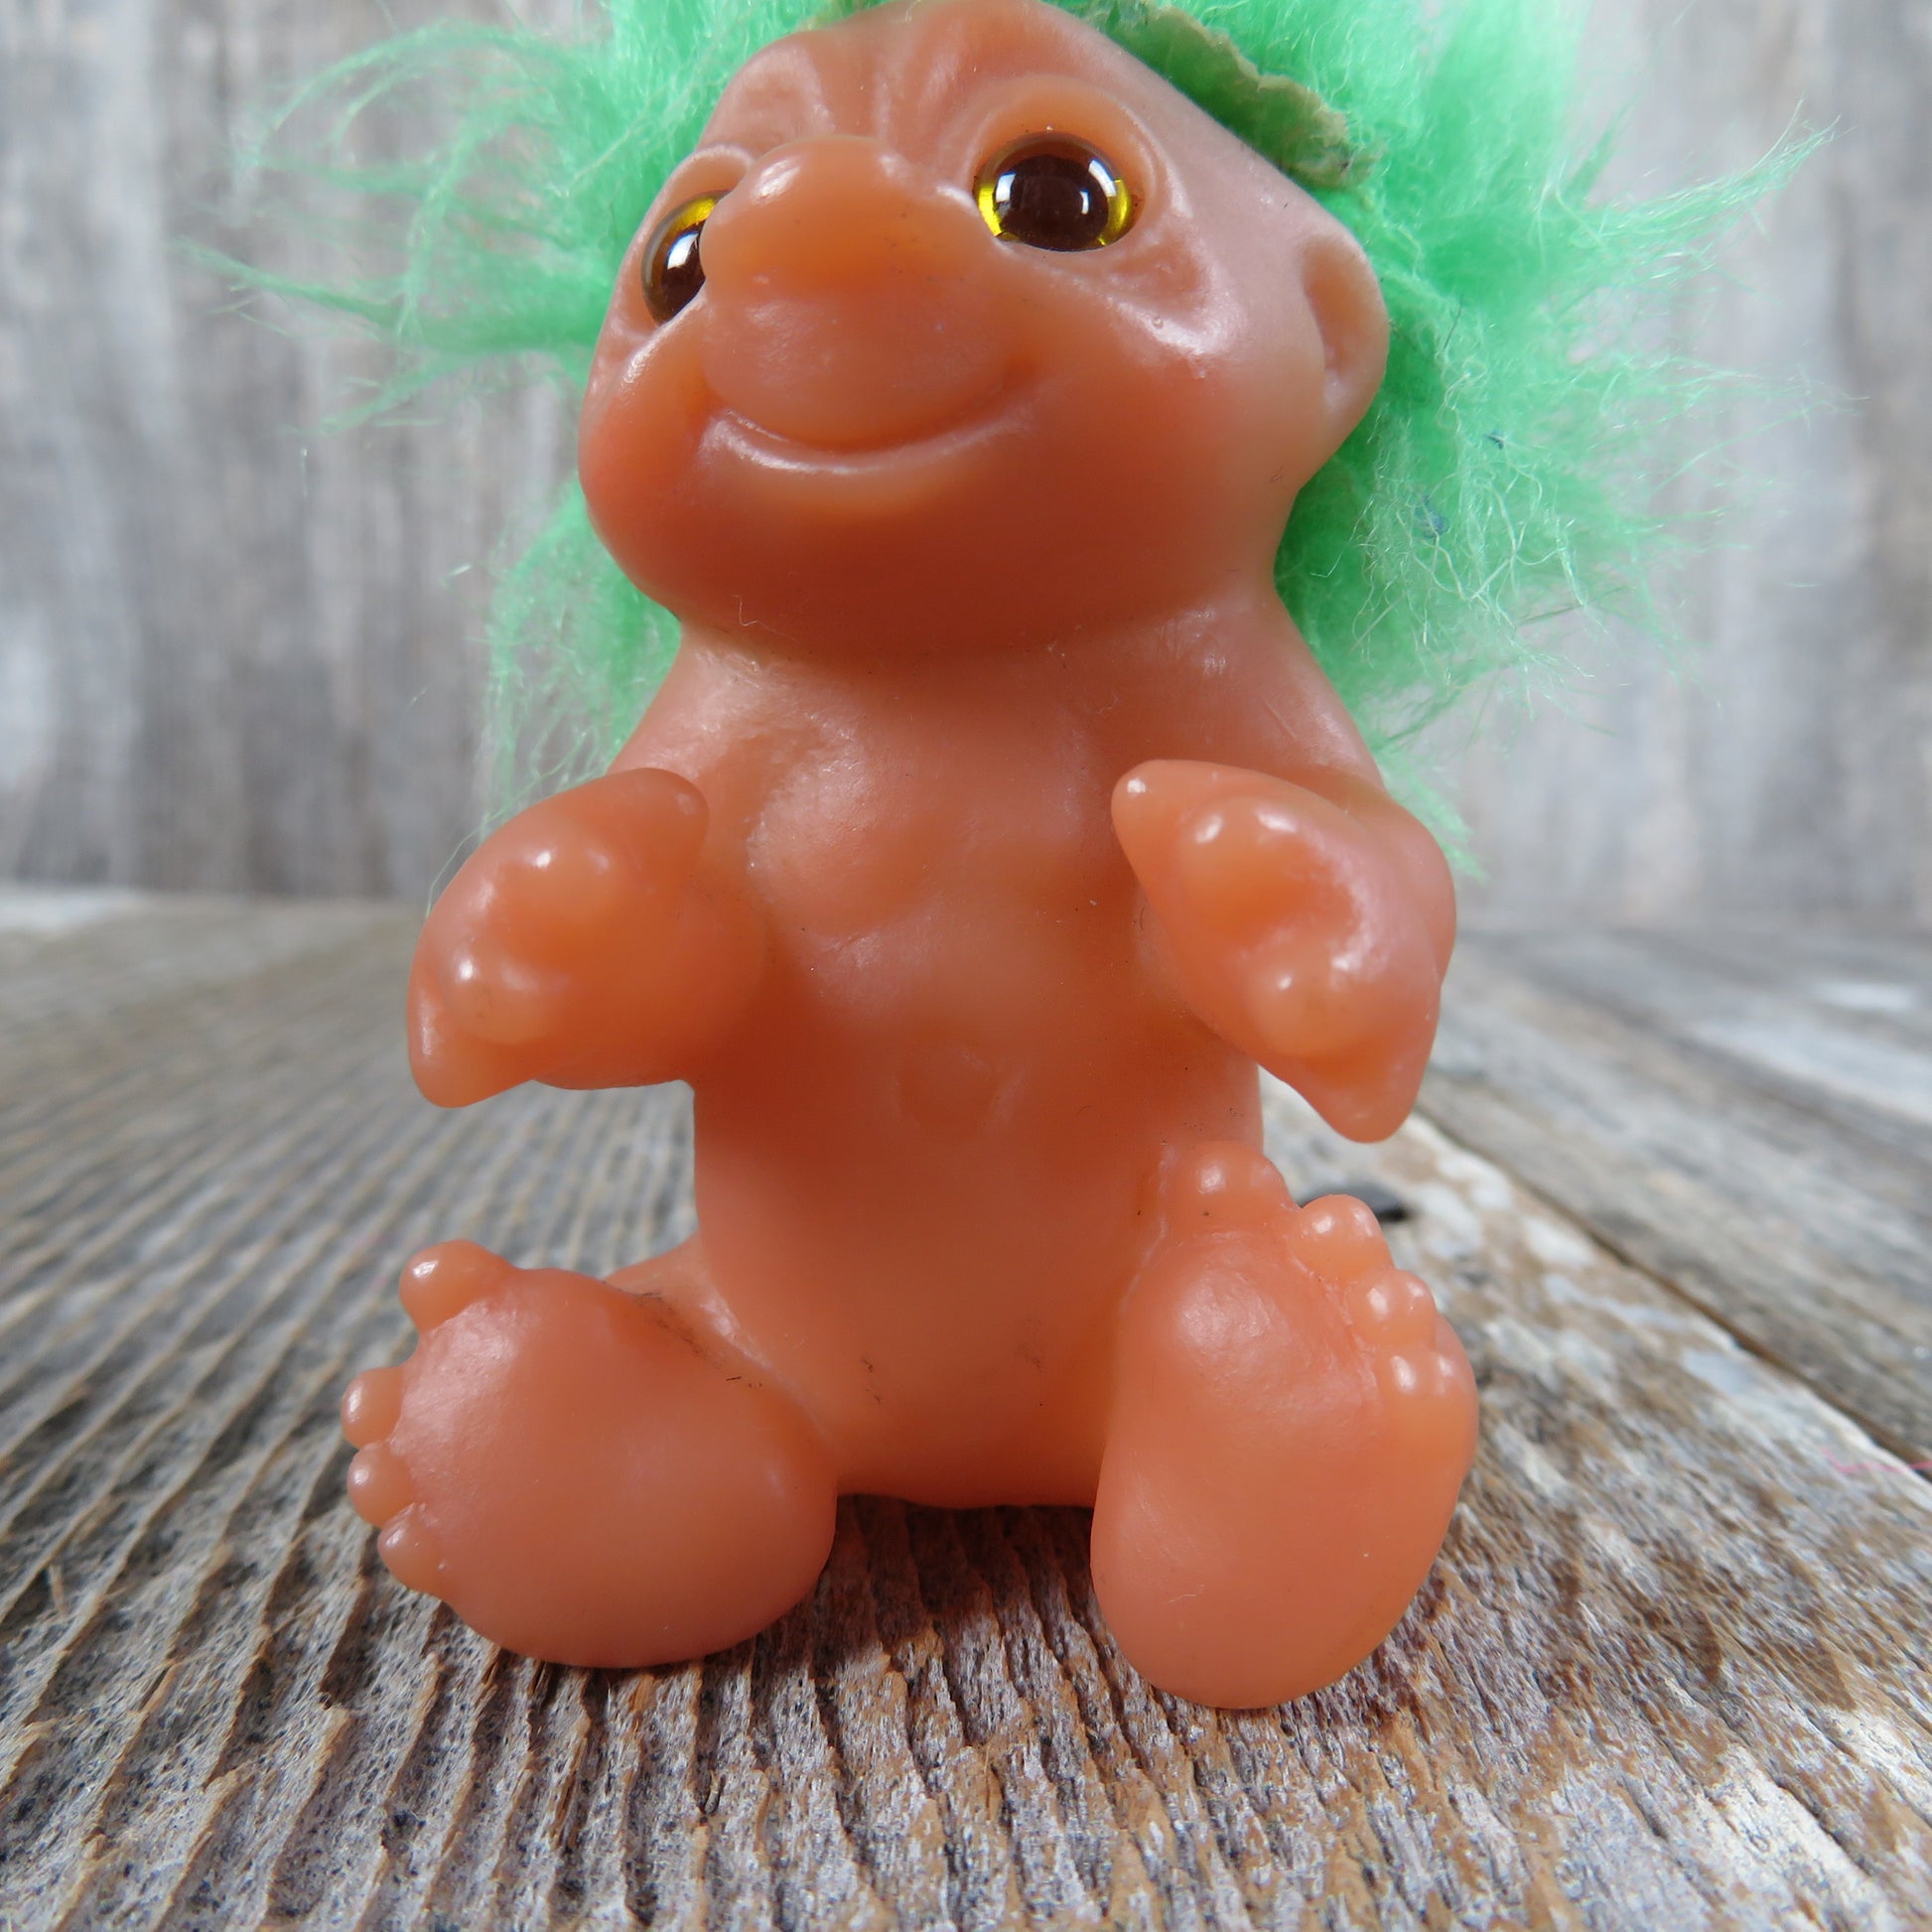 Vintage Baby Troll Doll Green Hair Infant Dam Norfin Naked 2.5 inches 1985 - At Grandma's Table